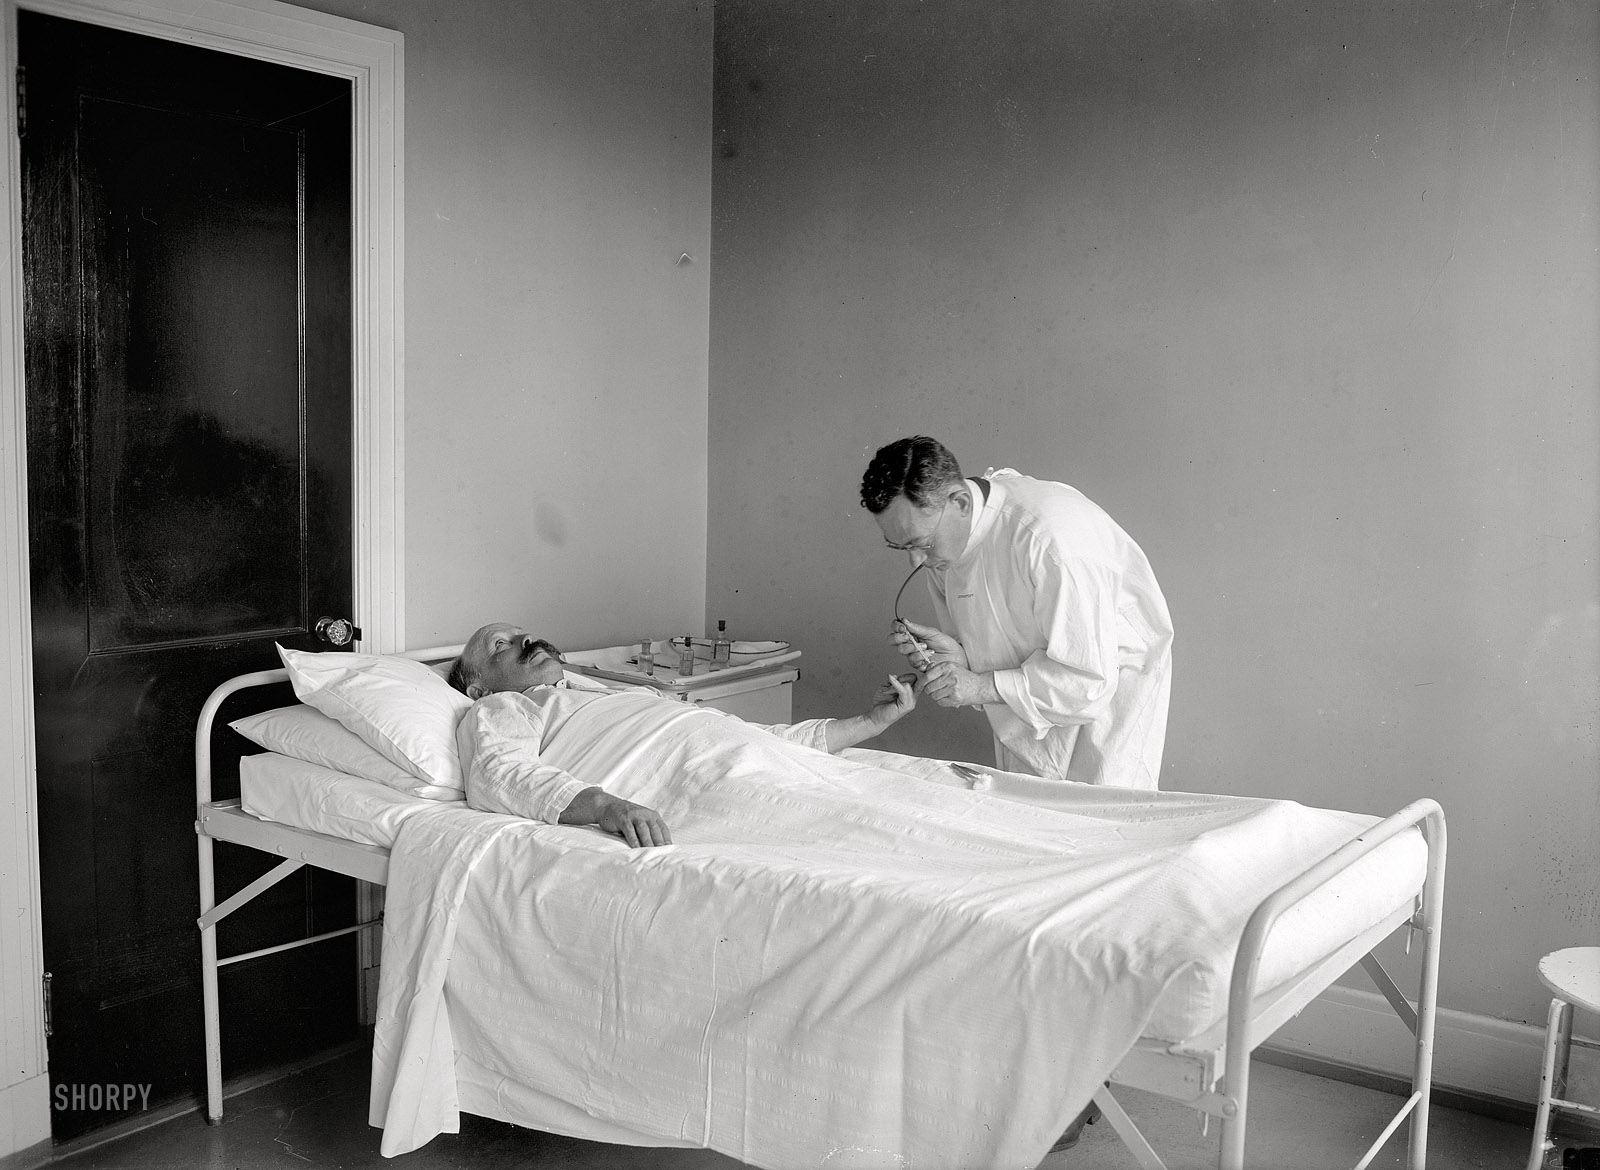 Washington, D.C. "Surgery, 1922." From a series depicting pre- and postoperative procedures, as well as surgery itself, at an unnamed hospital. View full size.